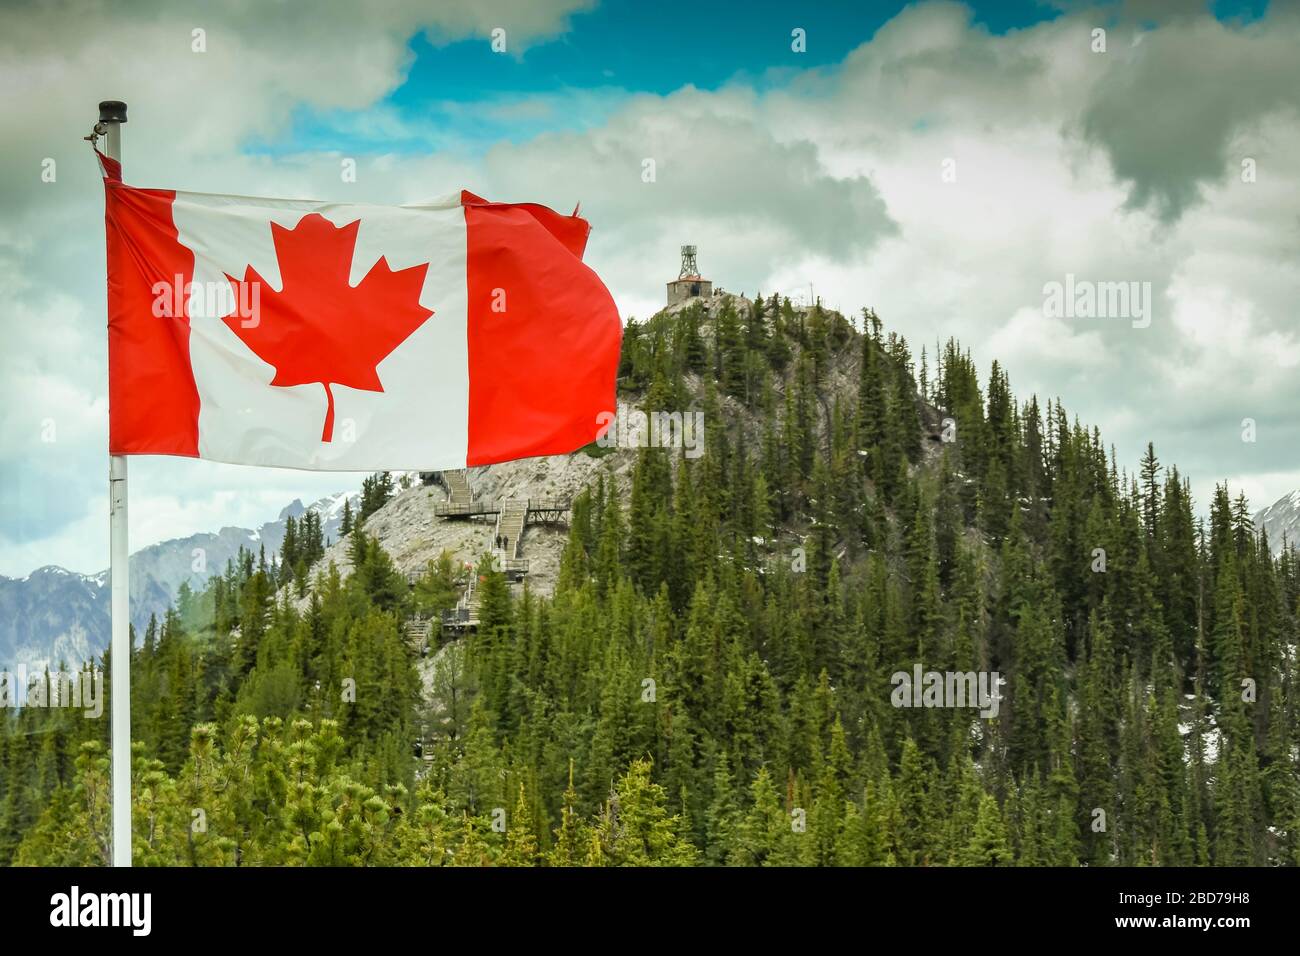 BANFF, AB, CANADA - JUNE 2018: National flag of Canada, the Maple Leaf, flying on Sulphur Mountain in Banff. Stock Photo